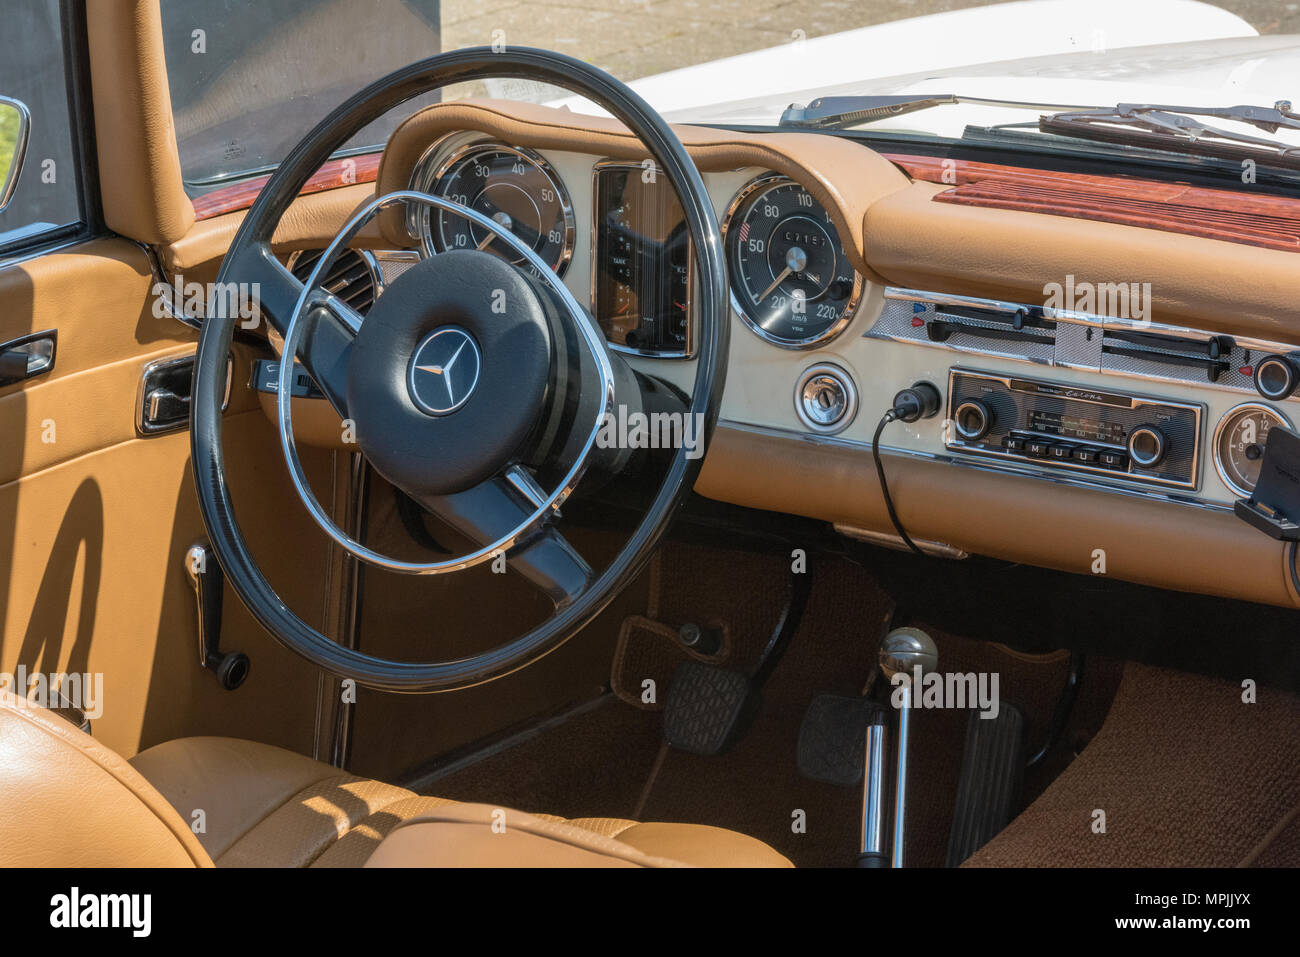 the steering wheel and dashboard of a vintage mercedes collectors sports car in beautiful condition. Classic german vintage cars in daily use for car. Stock Photo